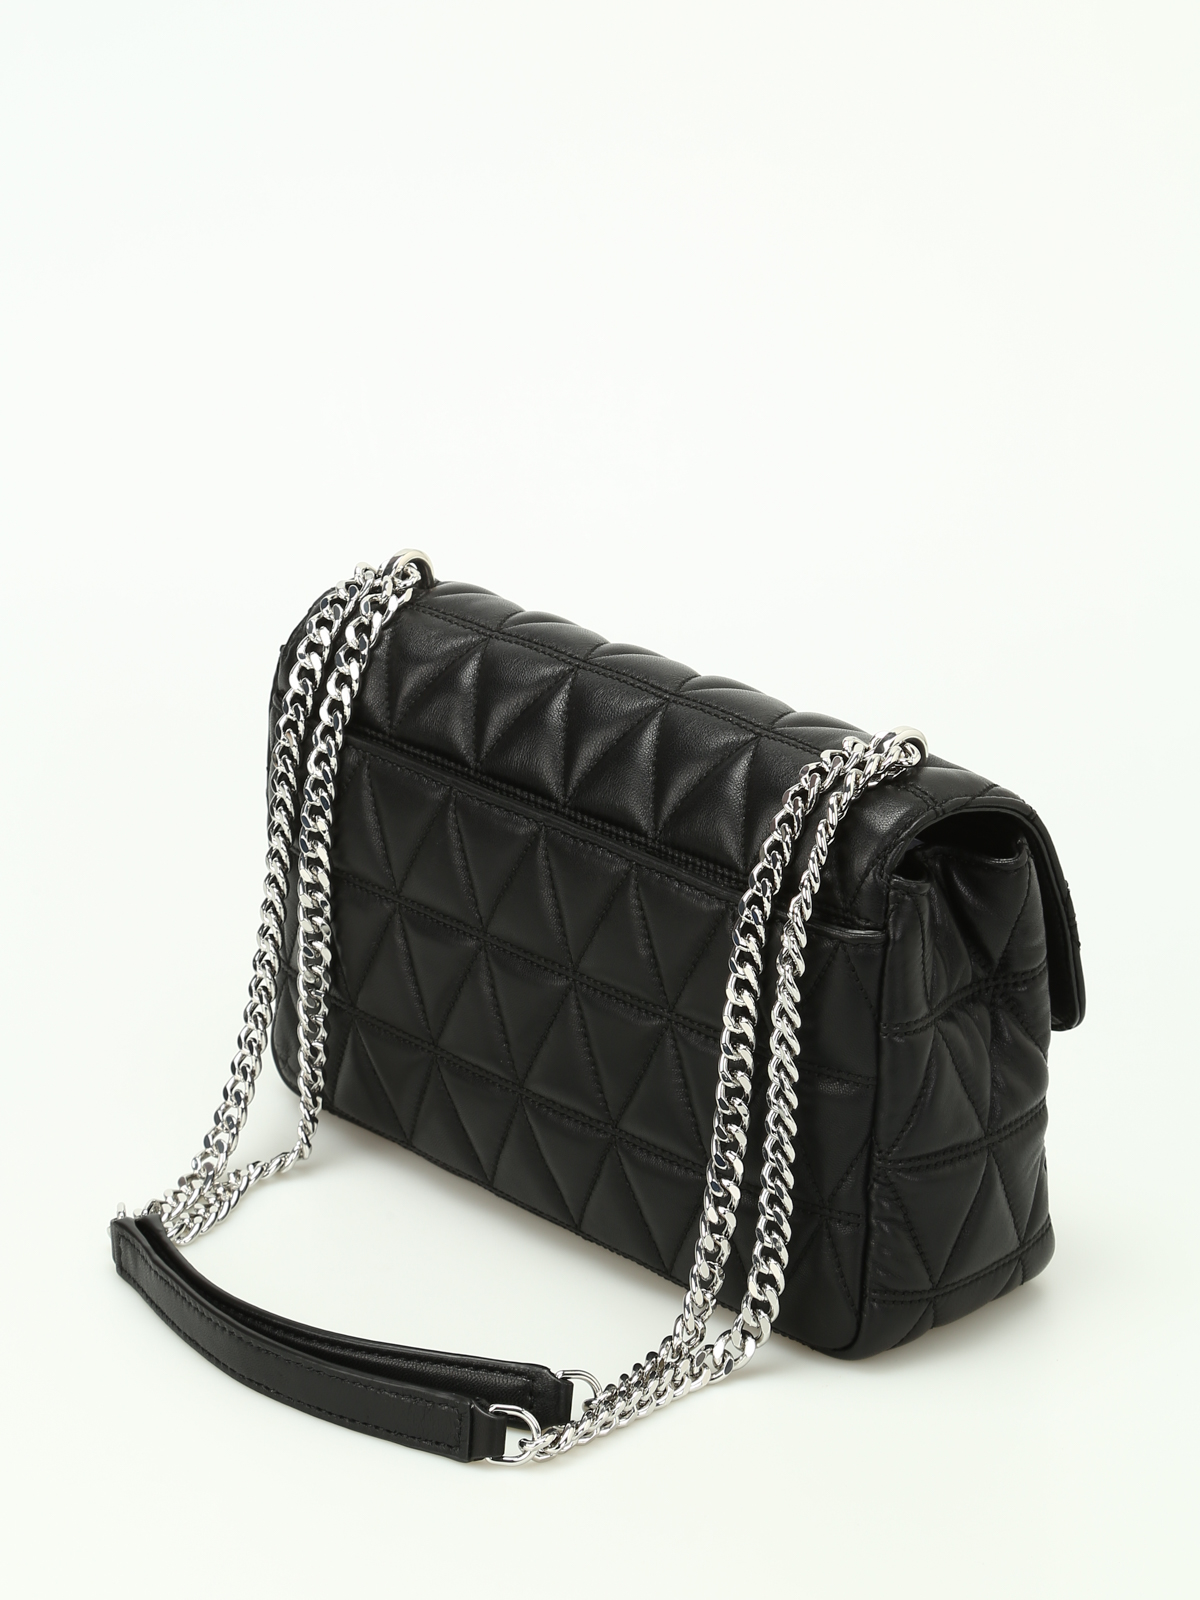 bags Michael Kors - Sloan large quilted bag - 30S7SSLL3L001